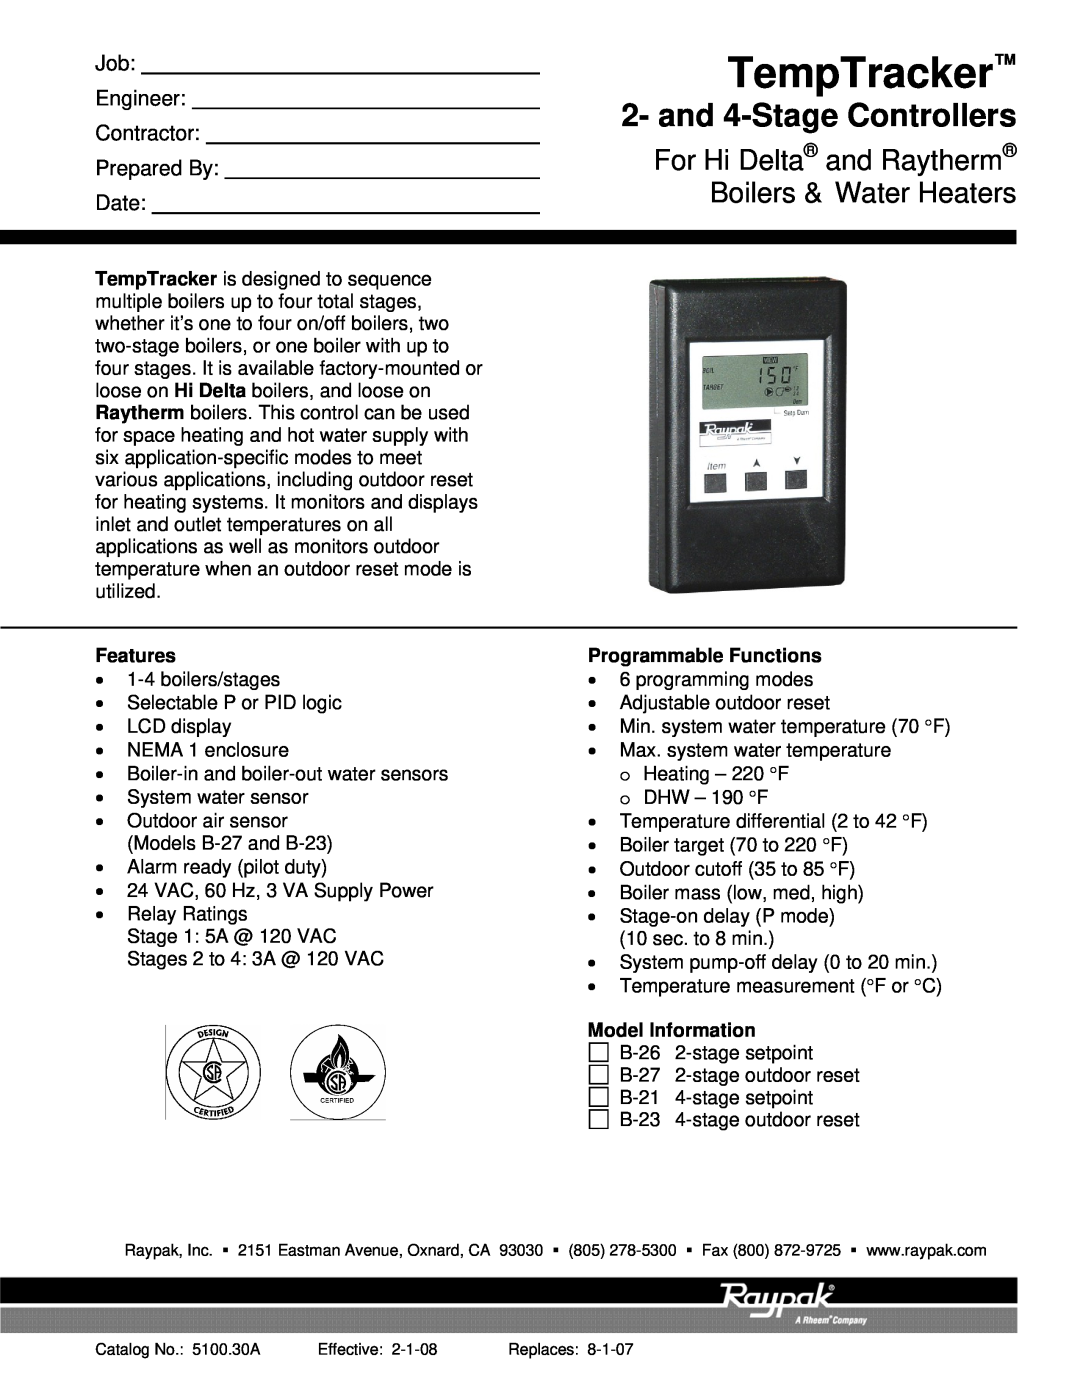 Raypak B-27 manual TempTracker, and 4-Stage Controllers, For Hi Delta and Raytherm, Boilers & Water Heaters, Engineer 